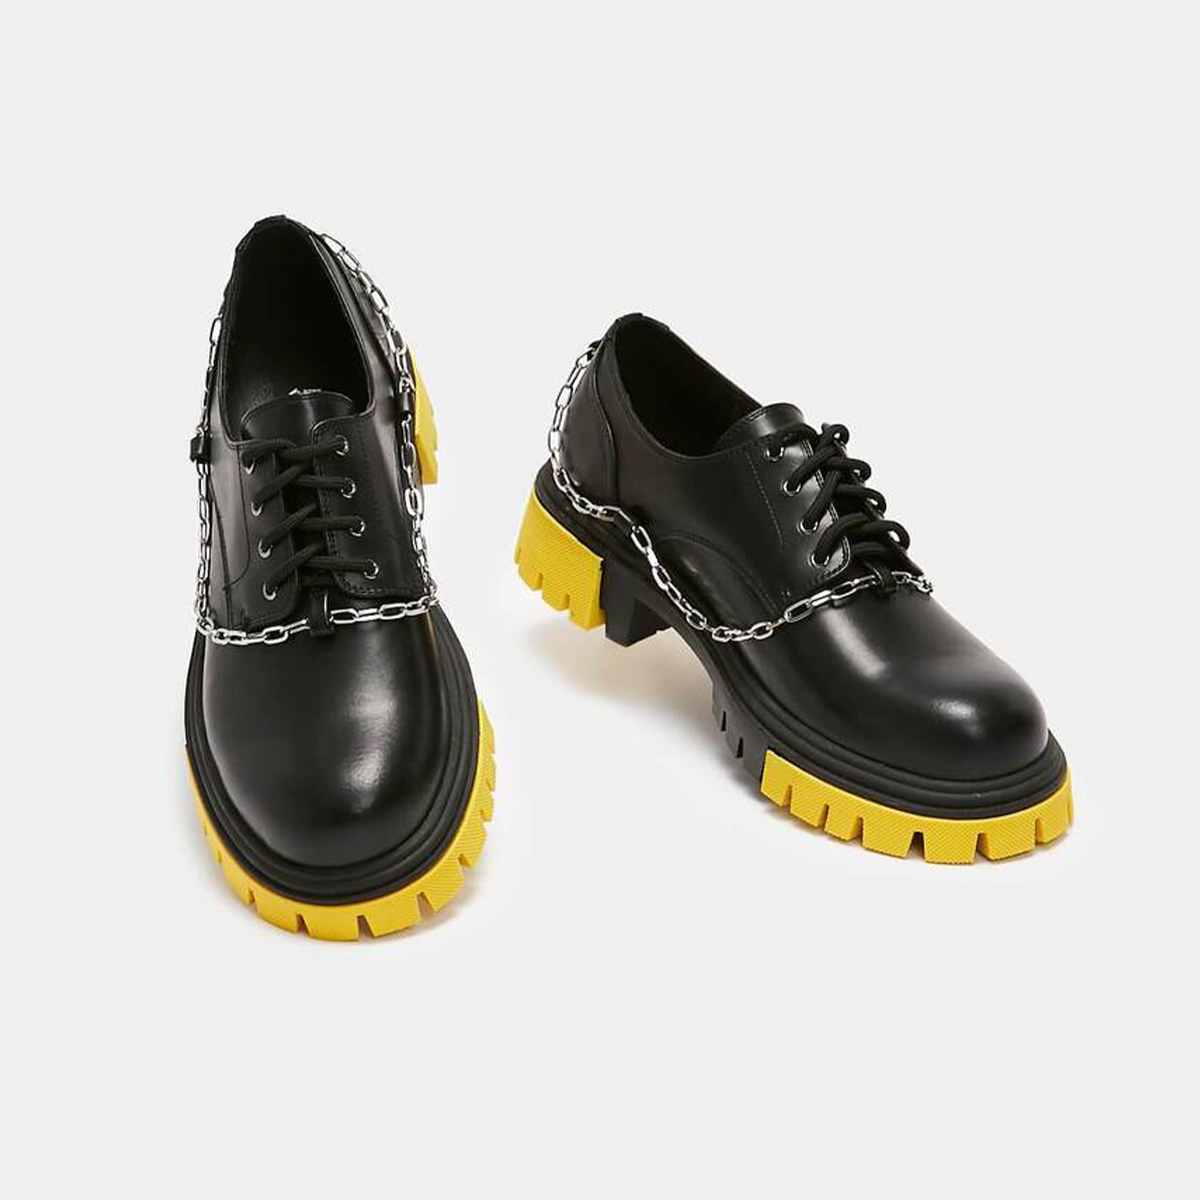 JAKE ENGLISH with our HALCYON Men's Yellow Split Chain Shoes, we think he would *love* these SHOP   https://bit.ly/3k4Rptp CREDIT: https://www.pinterest.co.uk/pin/779615385479389709/